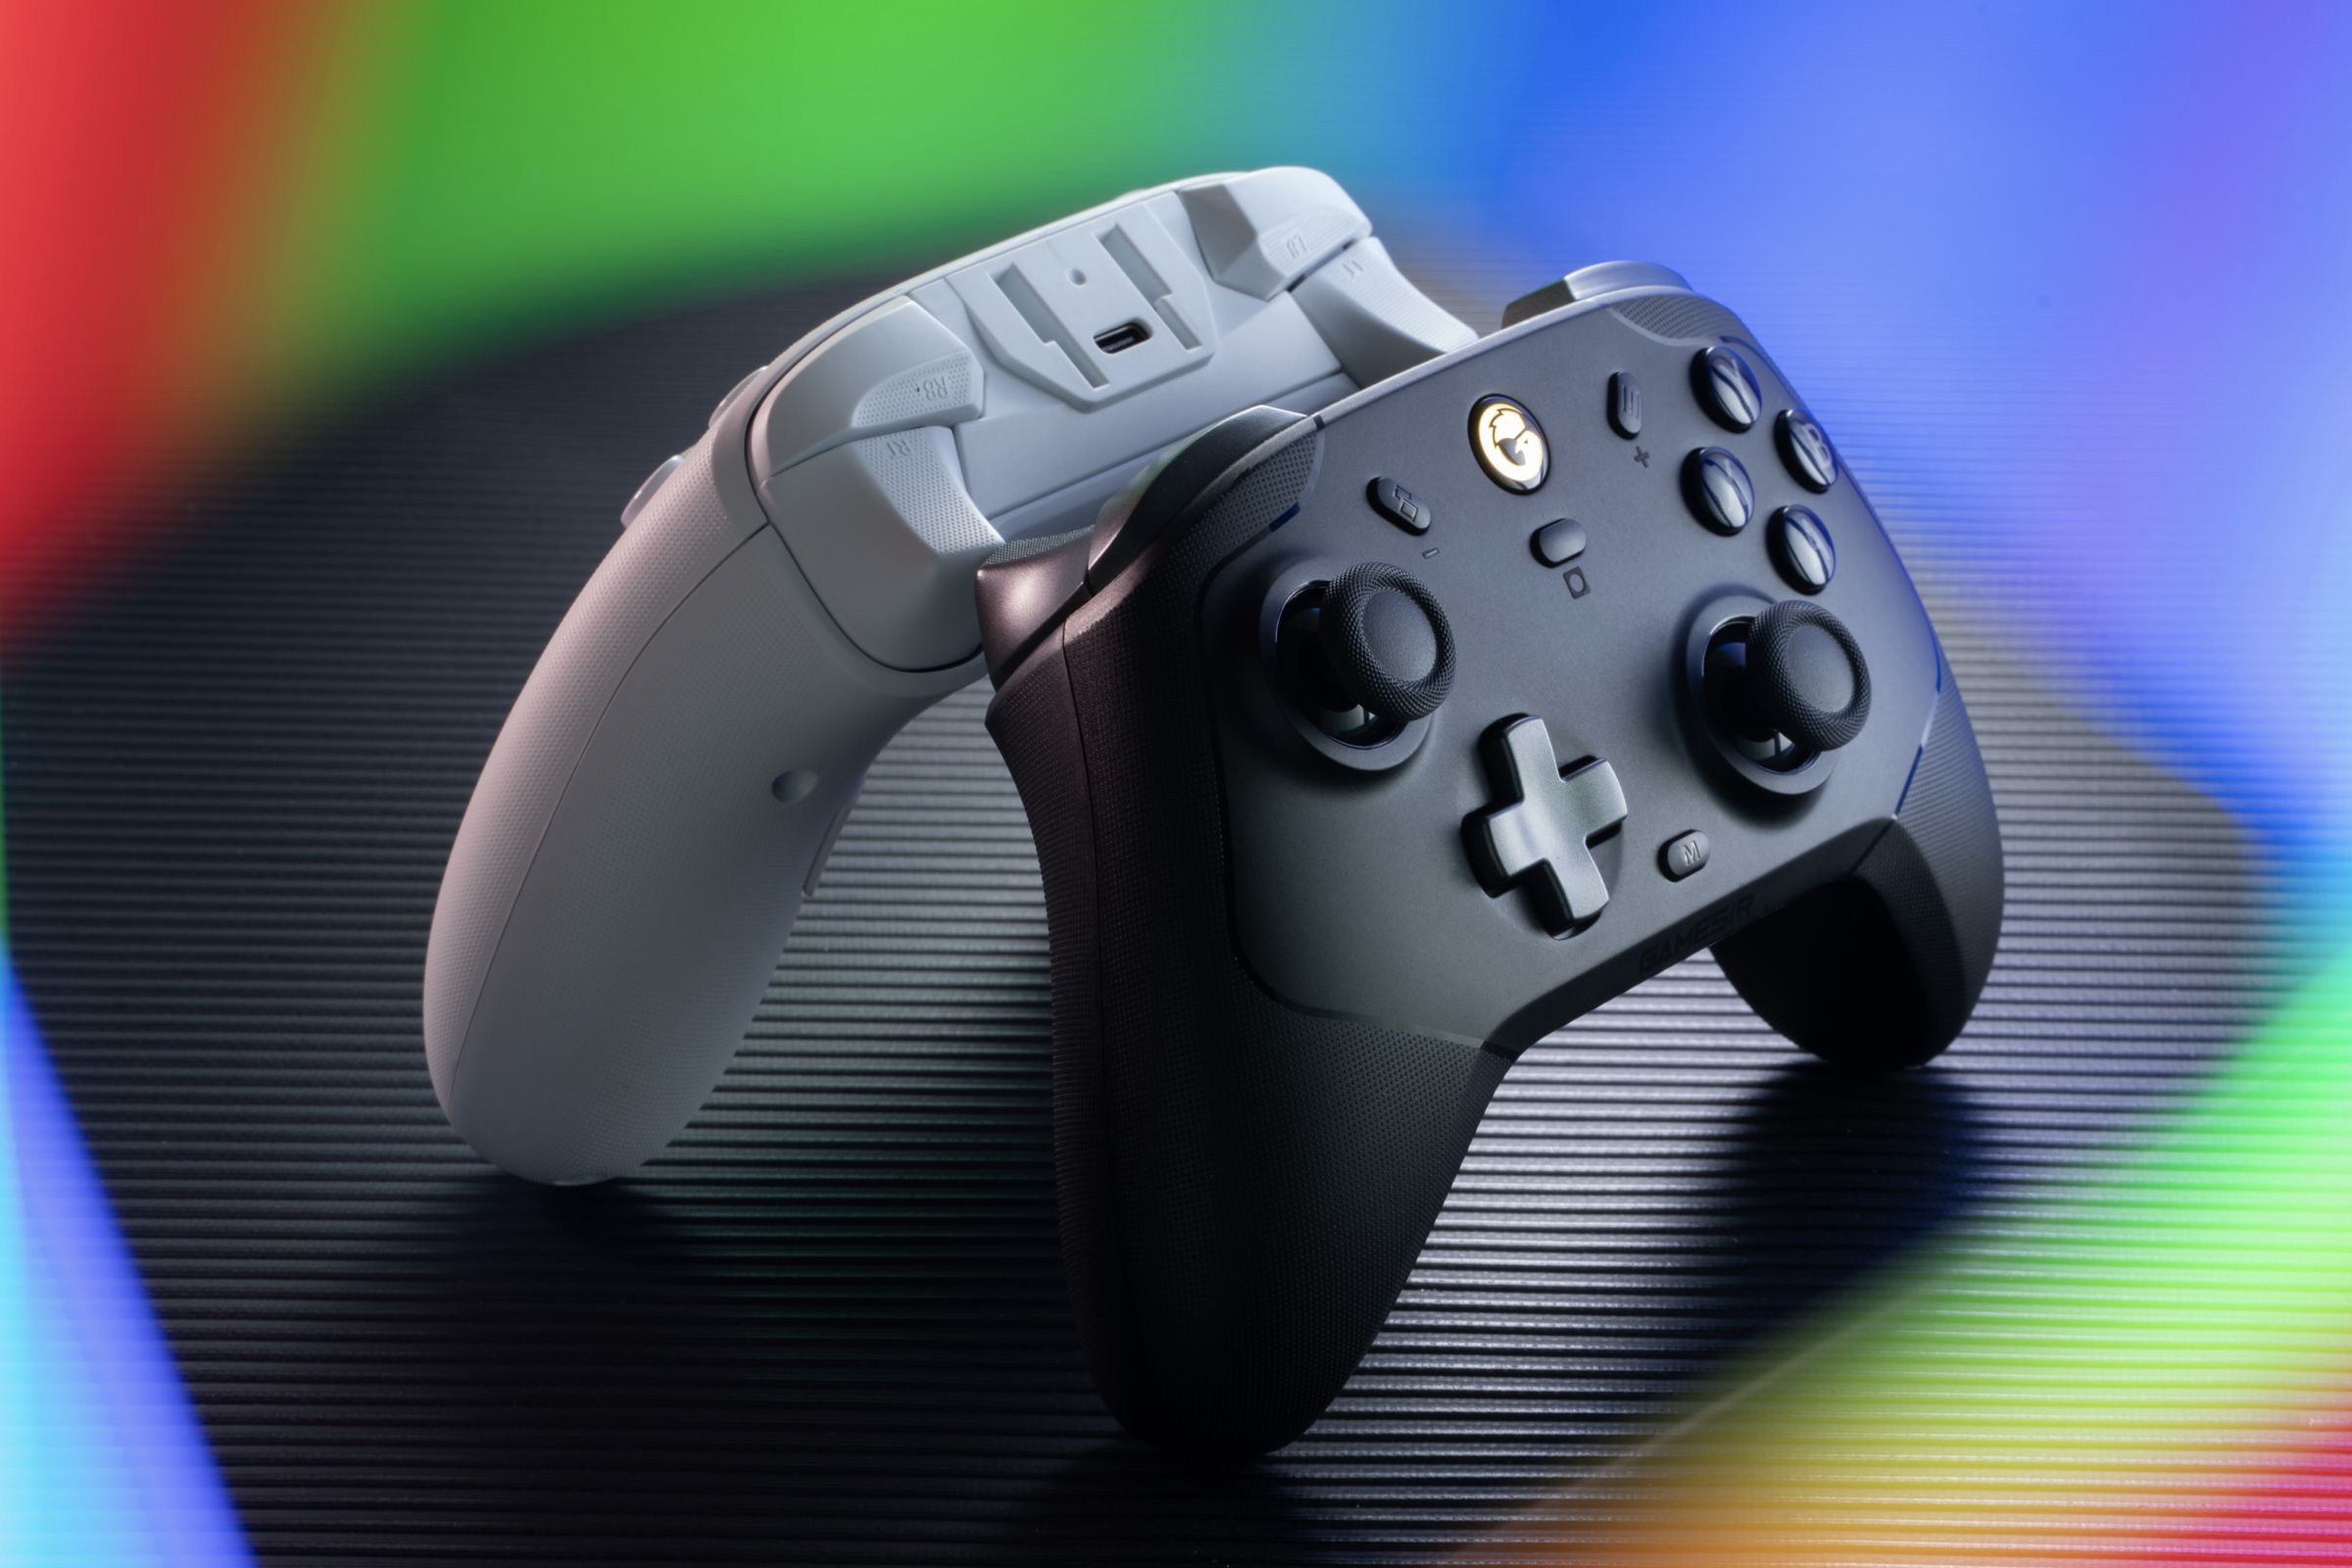 Black and white controllers standing back to back with rainbow colors surrounding them.